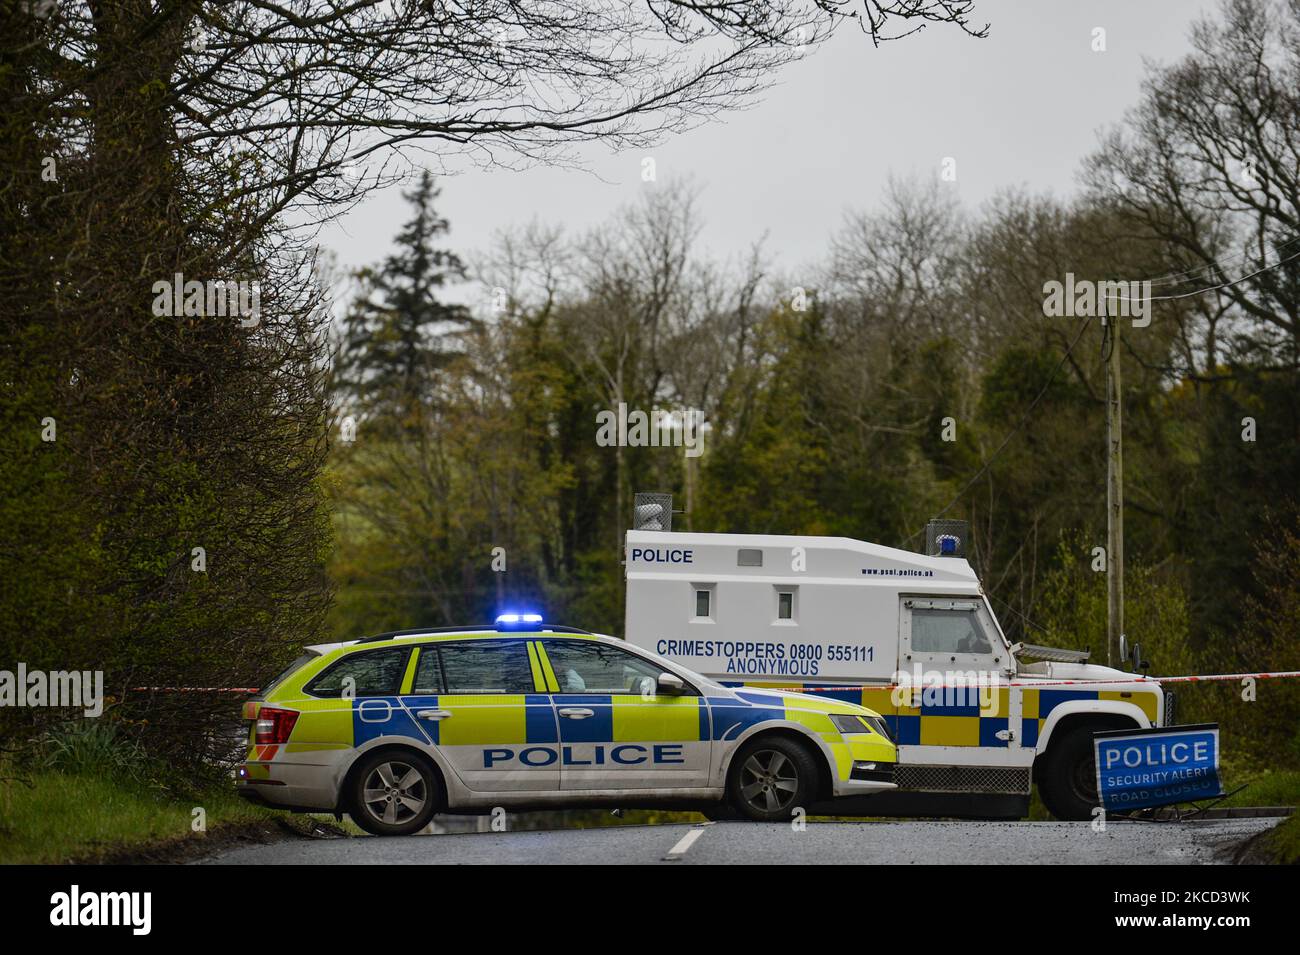 PSNI vehicles block the road during a security alert on Ballyquin Road on Monday after a viable explosive device was found near the house in a rural area near Dungiven. On Tuesday, April 20, 2021, in Dungiven, Co Londonderry. Northern Ireland. (Photo by Artur Widak/NurPhoto) Stock Photo